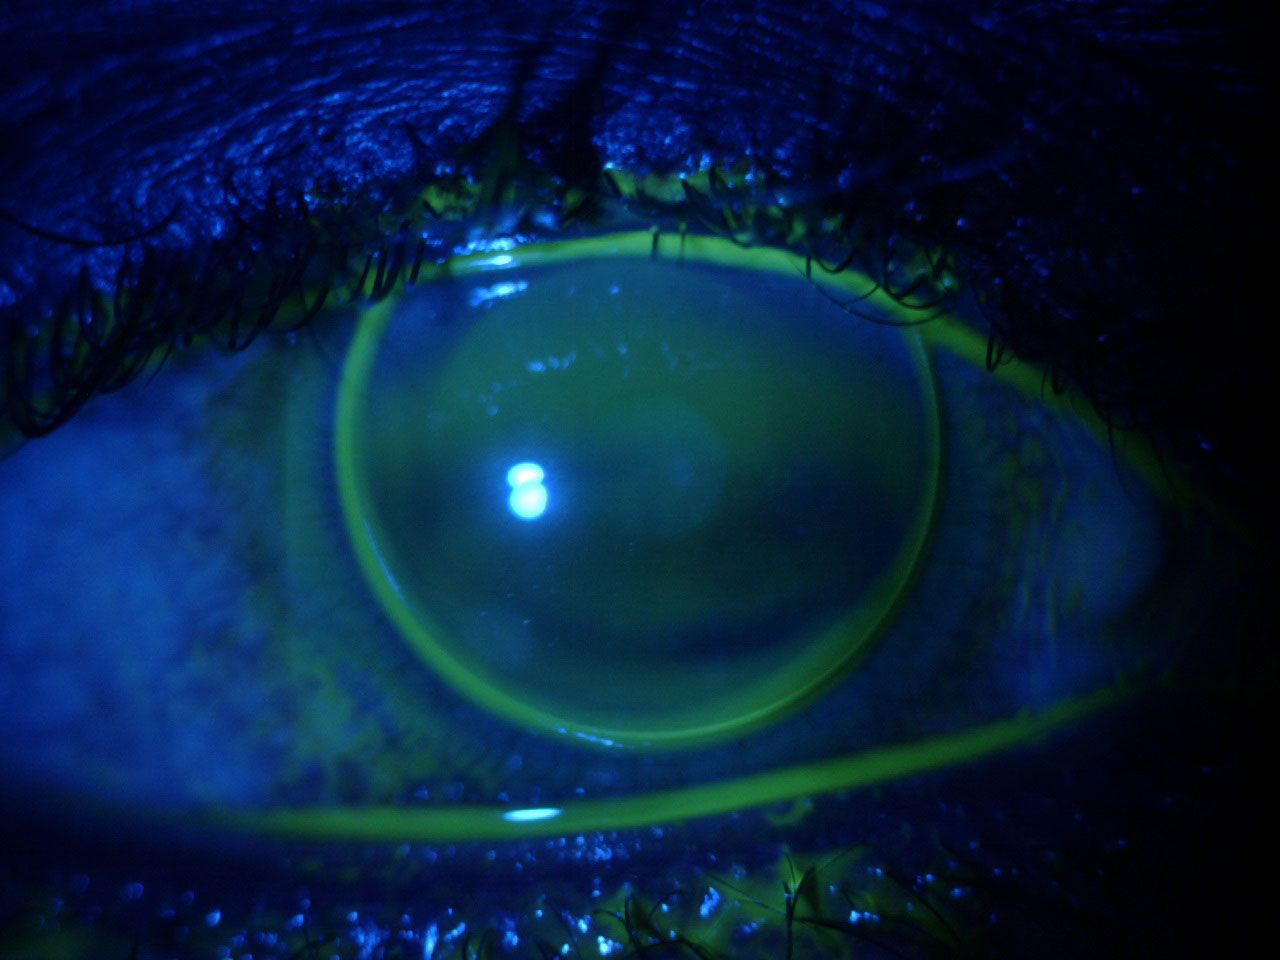 Fig 2. Corneal GP fit on a myopic patient with neovascularization due to previous overwear of a hydrogel soft lens.